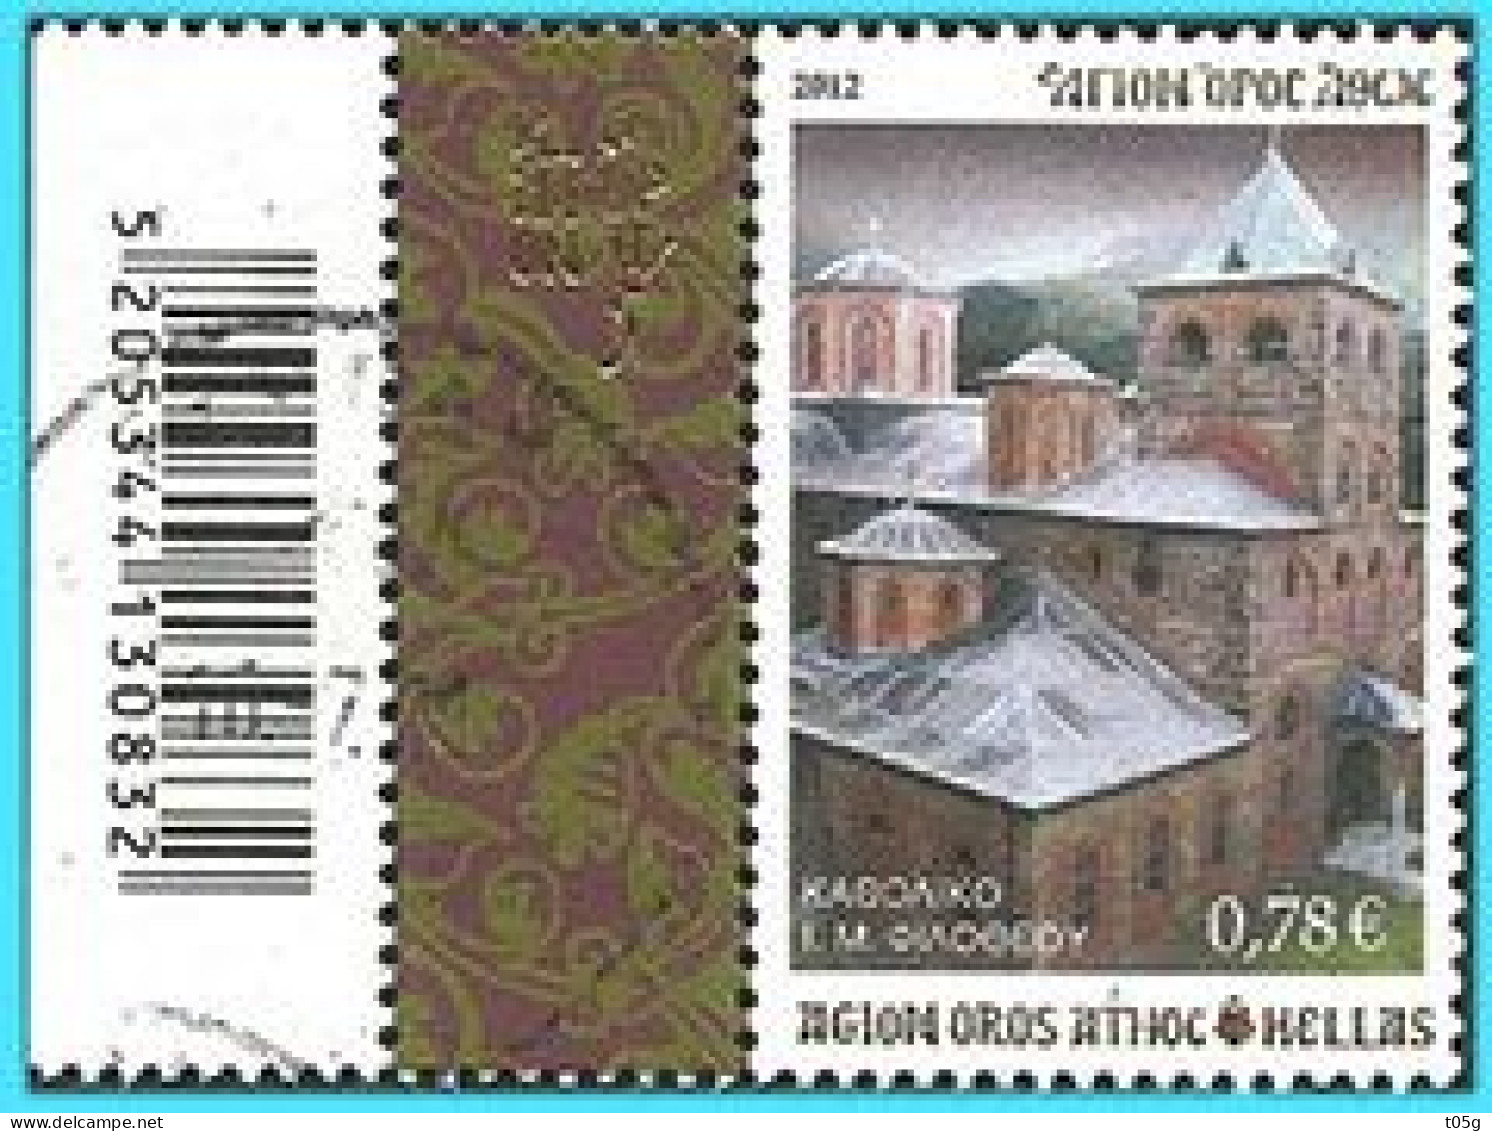 GREECE- GRECE- HELLAS - AGION OROS 2012: 0.78€  (with Barcode) From Set Used - Gebruikt